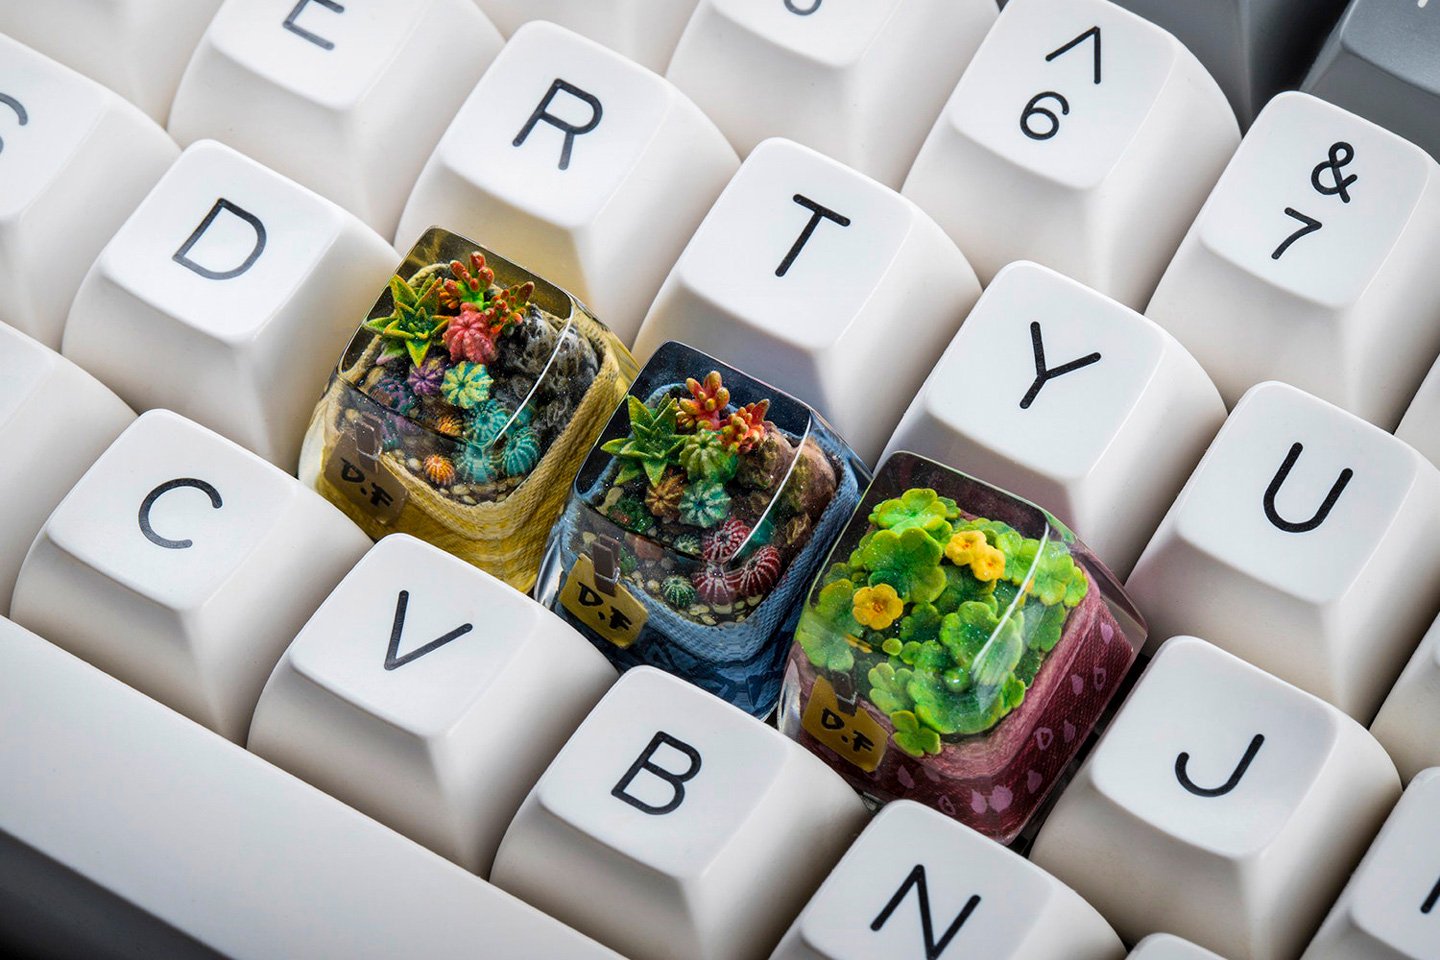 #Adorable tiny keycap terrariums add a touch of greenery to your keyboard!